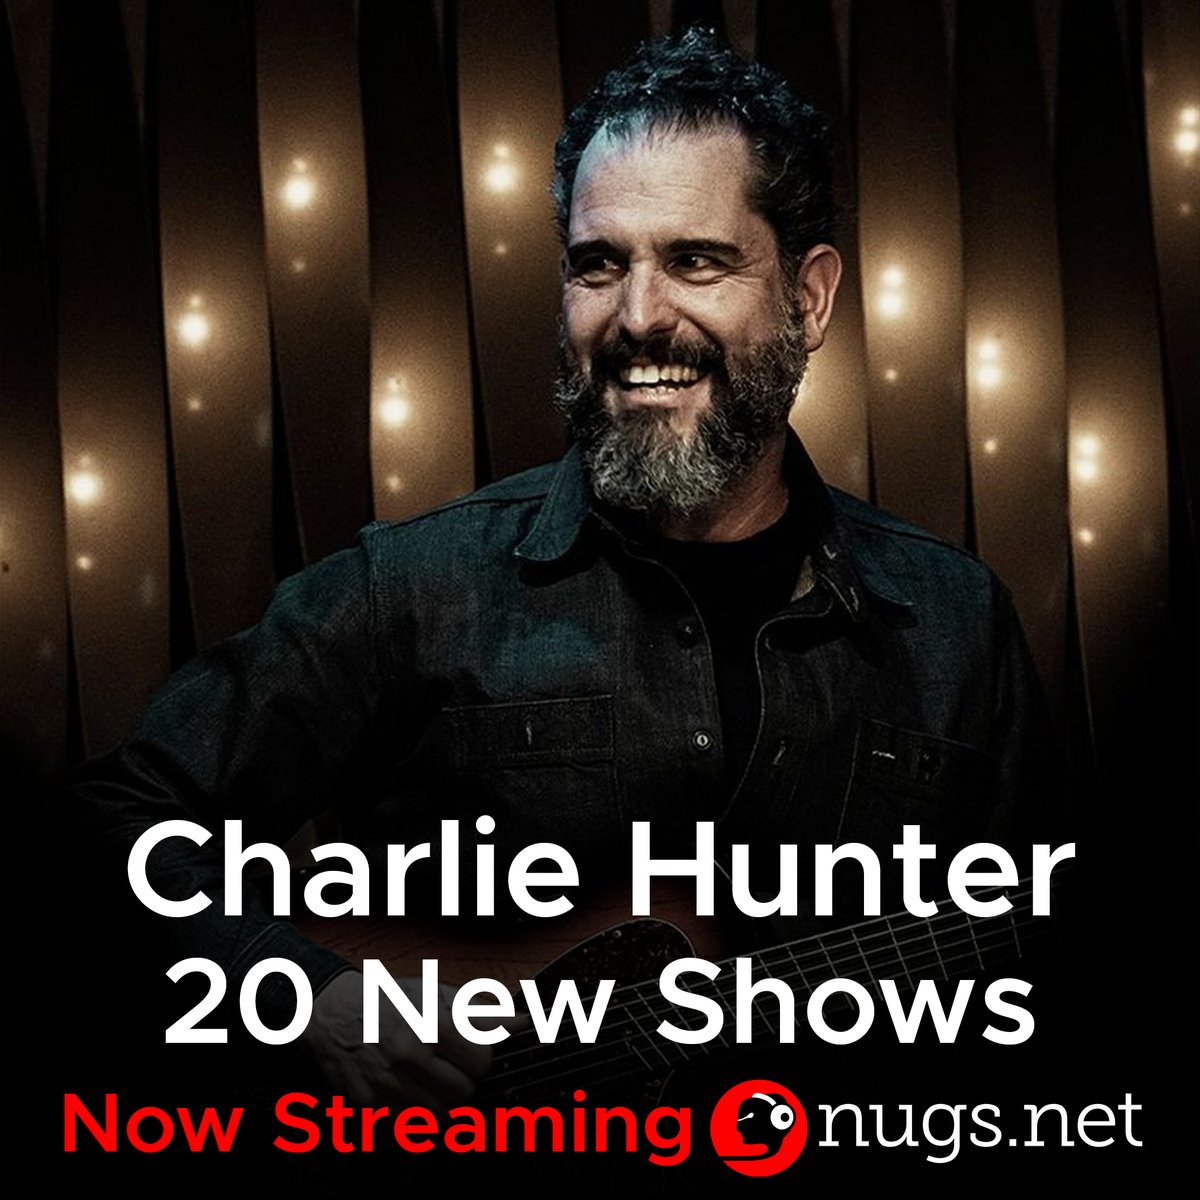 Charlie Hunter just dropped 20 new archival soundboards, exclusive to the nugs app 🚨 ➡️ 2nu.gs/CharlieHunterTW Hunter's 8-string jazz-guitar style has attracted well-deserved reverence from colleagues and fans alike, and the first batch of shows features performances from…